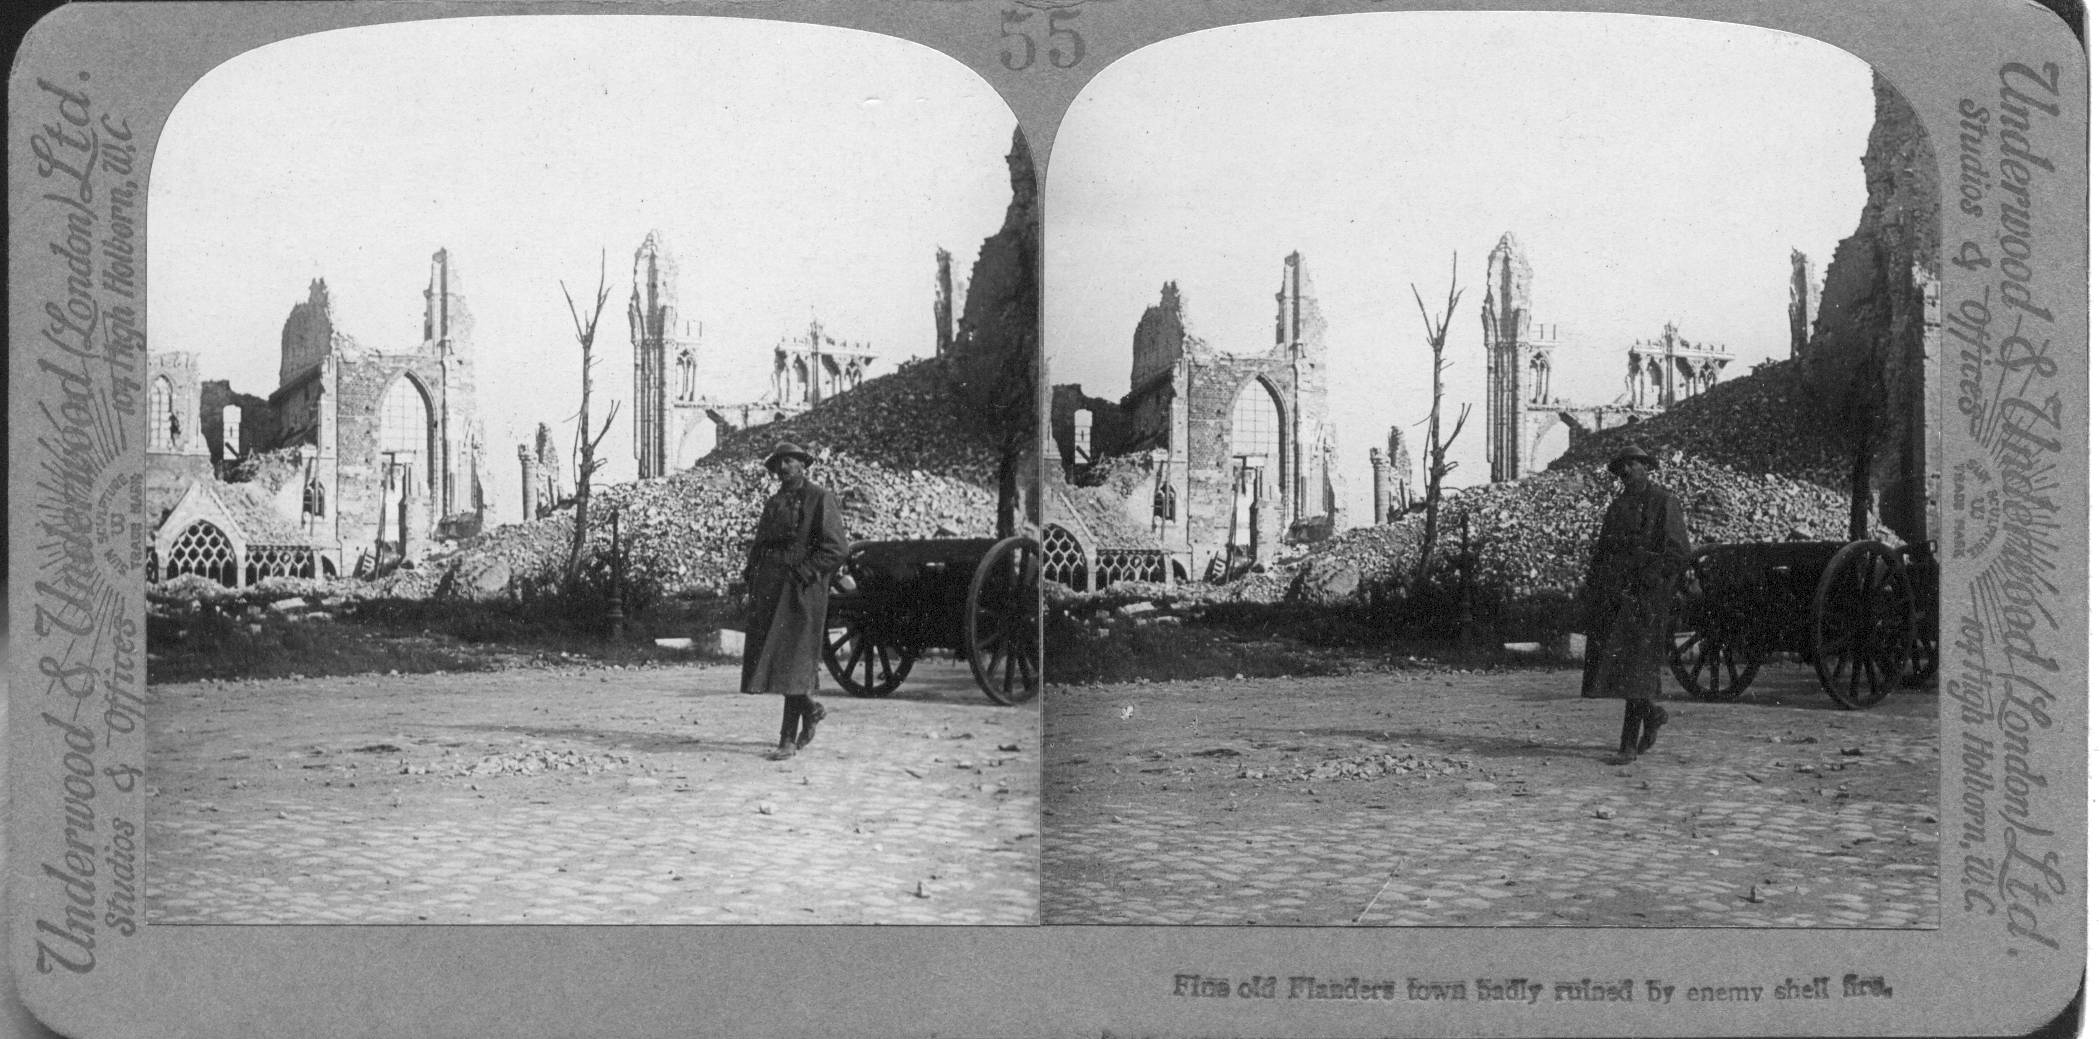 Fine old Flanders town badly ruined by enemy shell fire